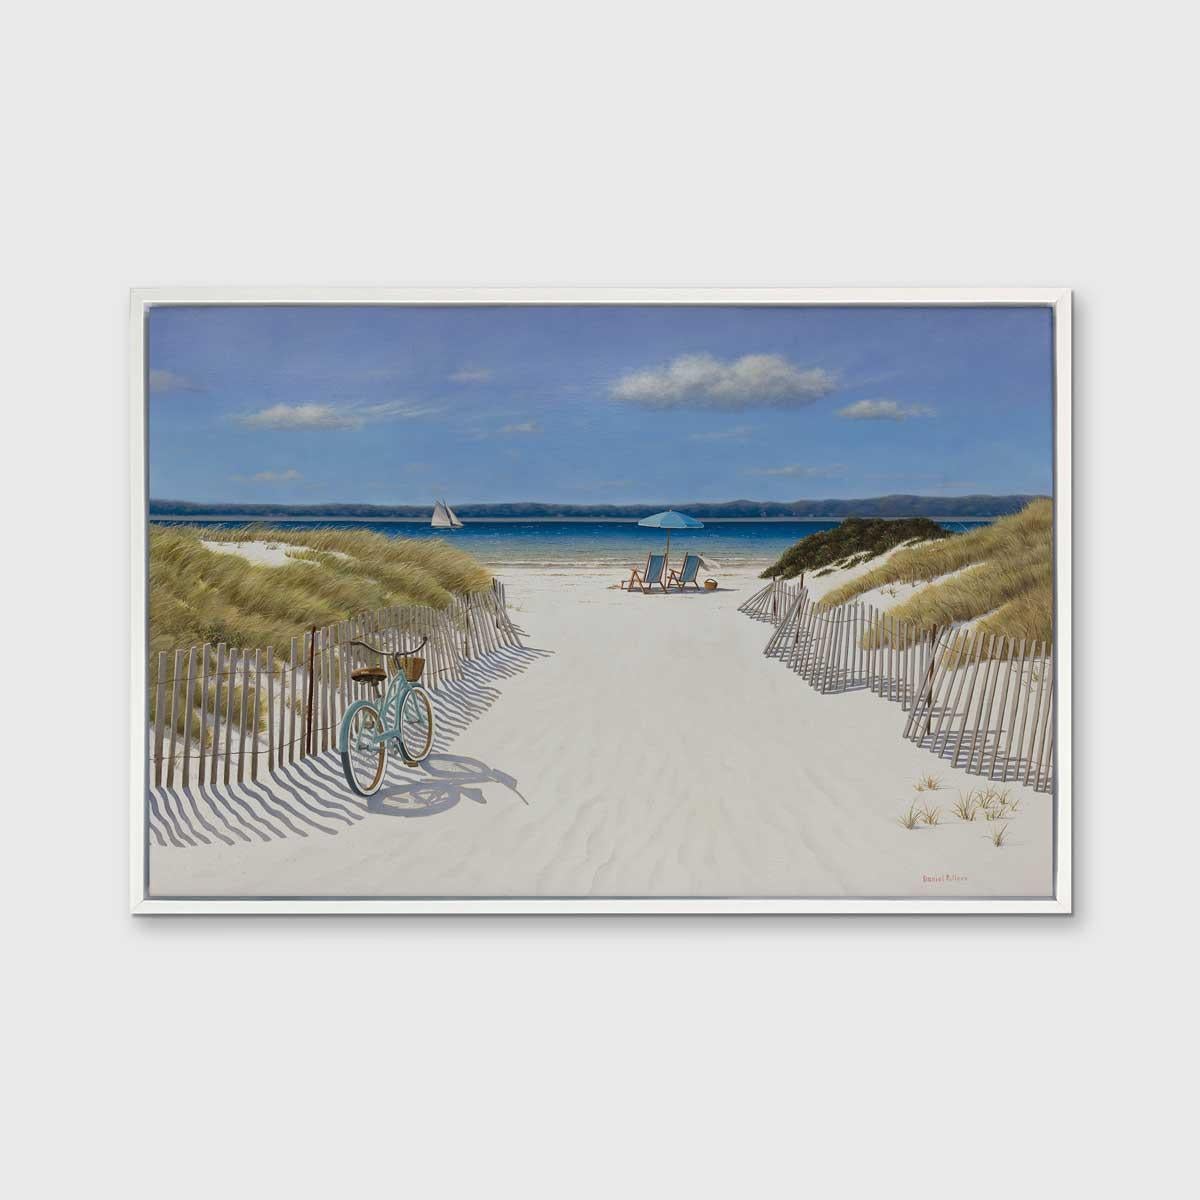 This coastal Limited Edition print by Daniel Pollera pictures a sandy walk with wooden fencing and grass on either side, leading to a beach. Two beach chairs and an umbrella overlook a vibrant, blue body of water, with hills on the horizon line,